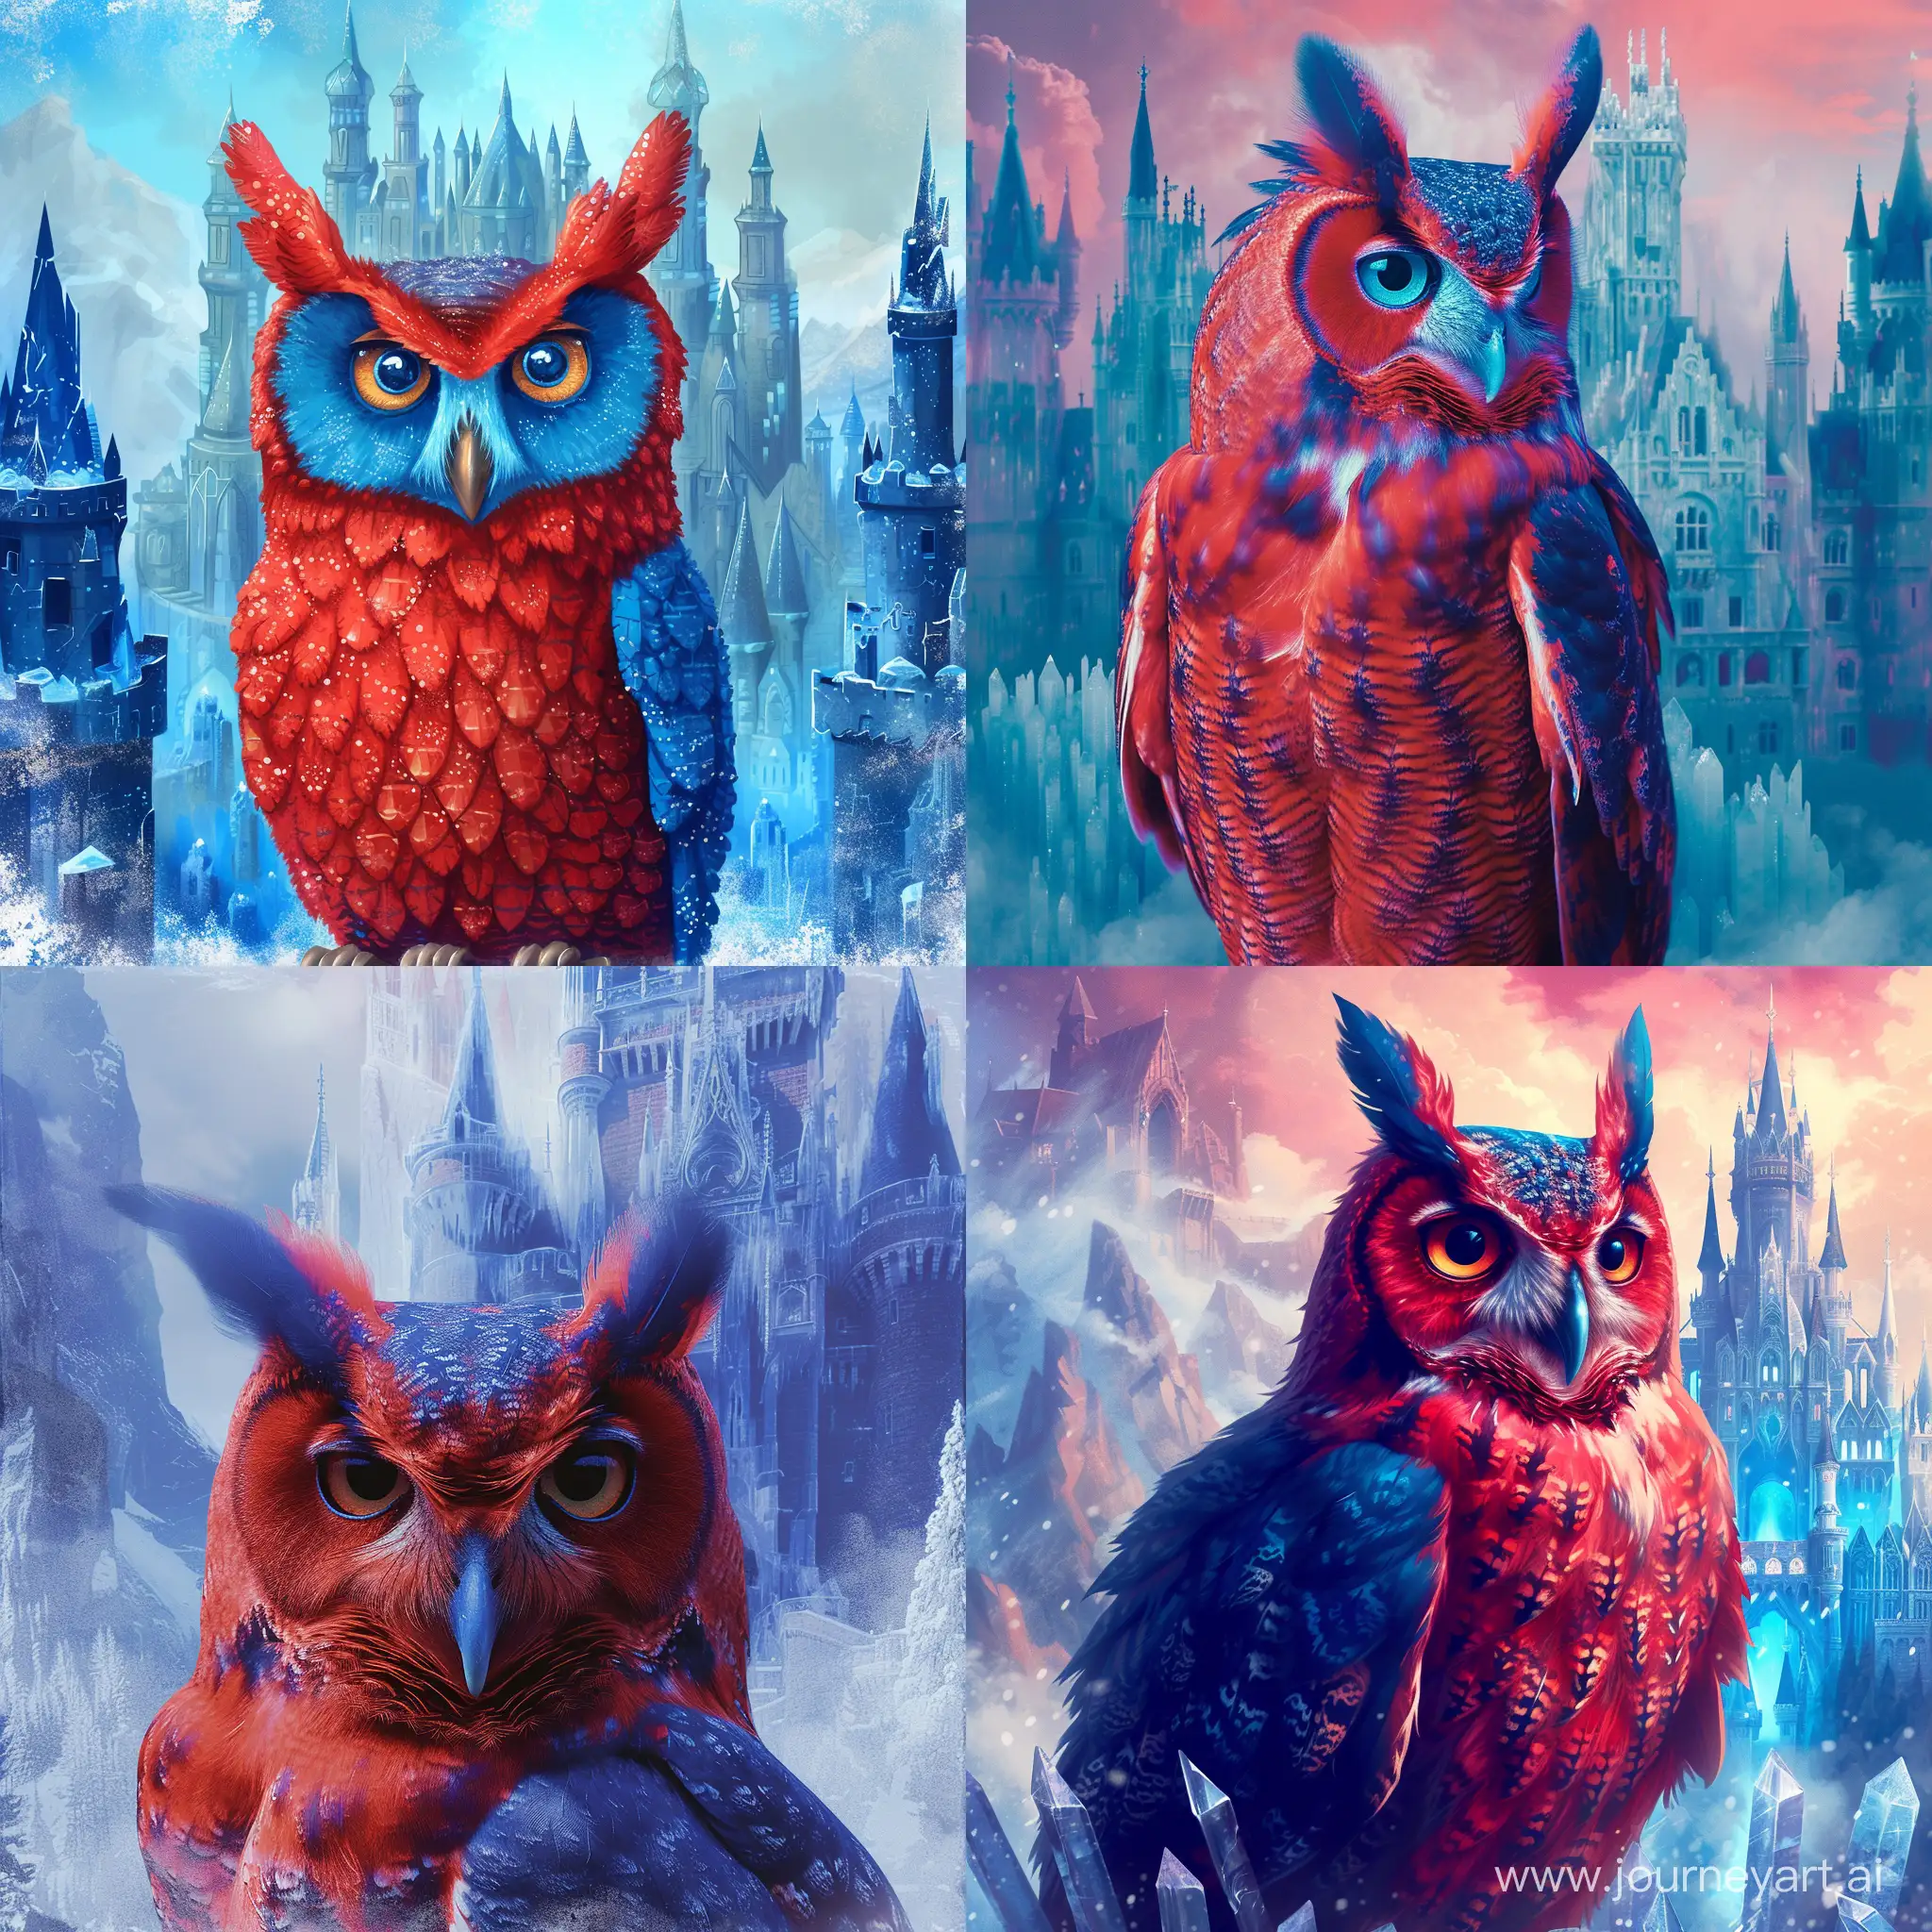 Majestic-Red-and-Blue-Owl-Perched-by-Crystal-Castle